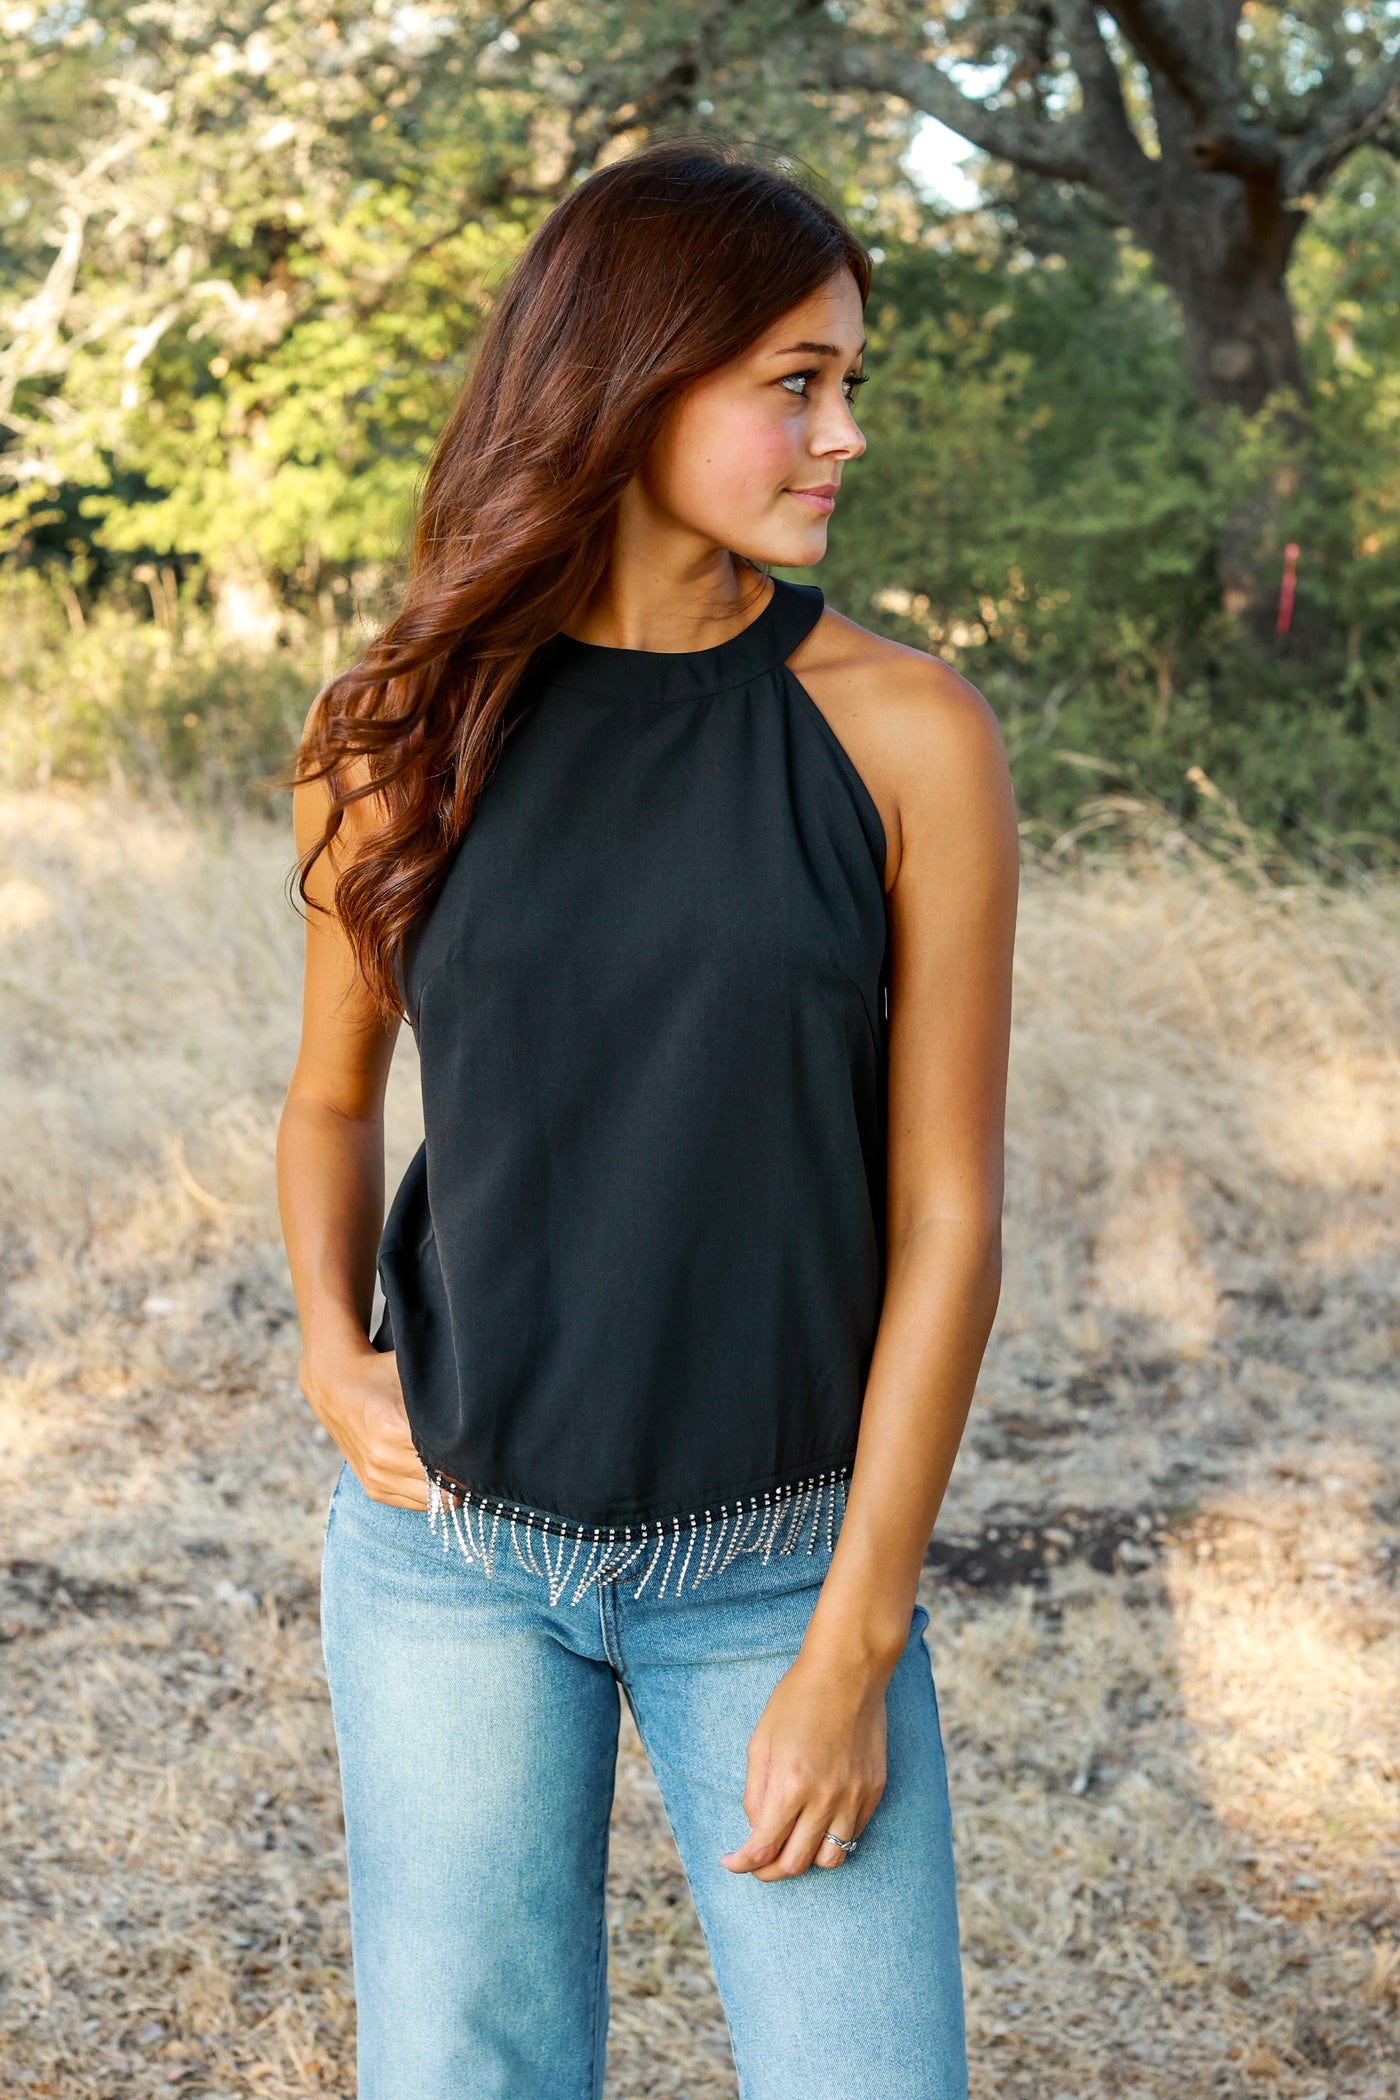 Simply Perfect Black Halter Top with Rhinestone Fringe